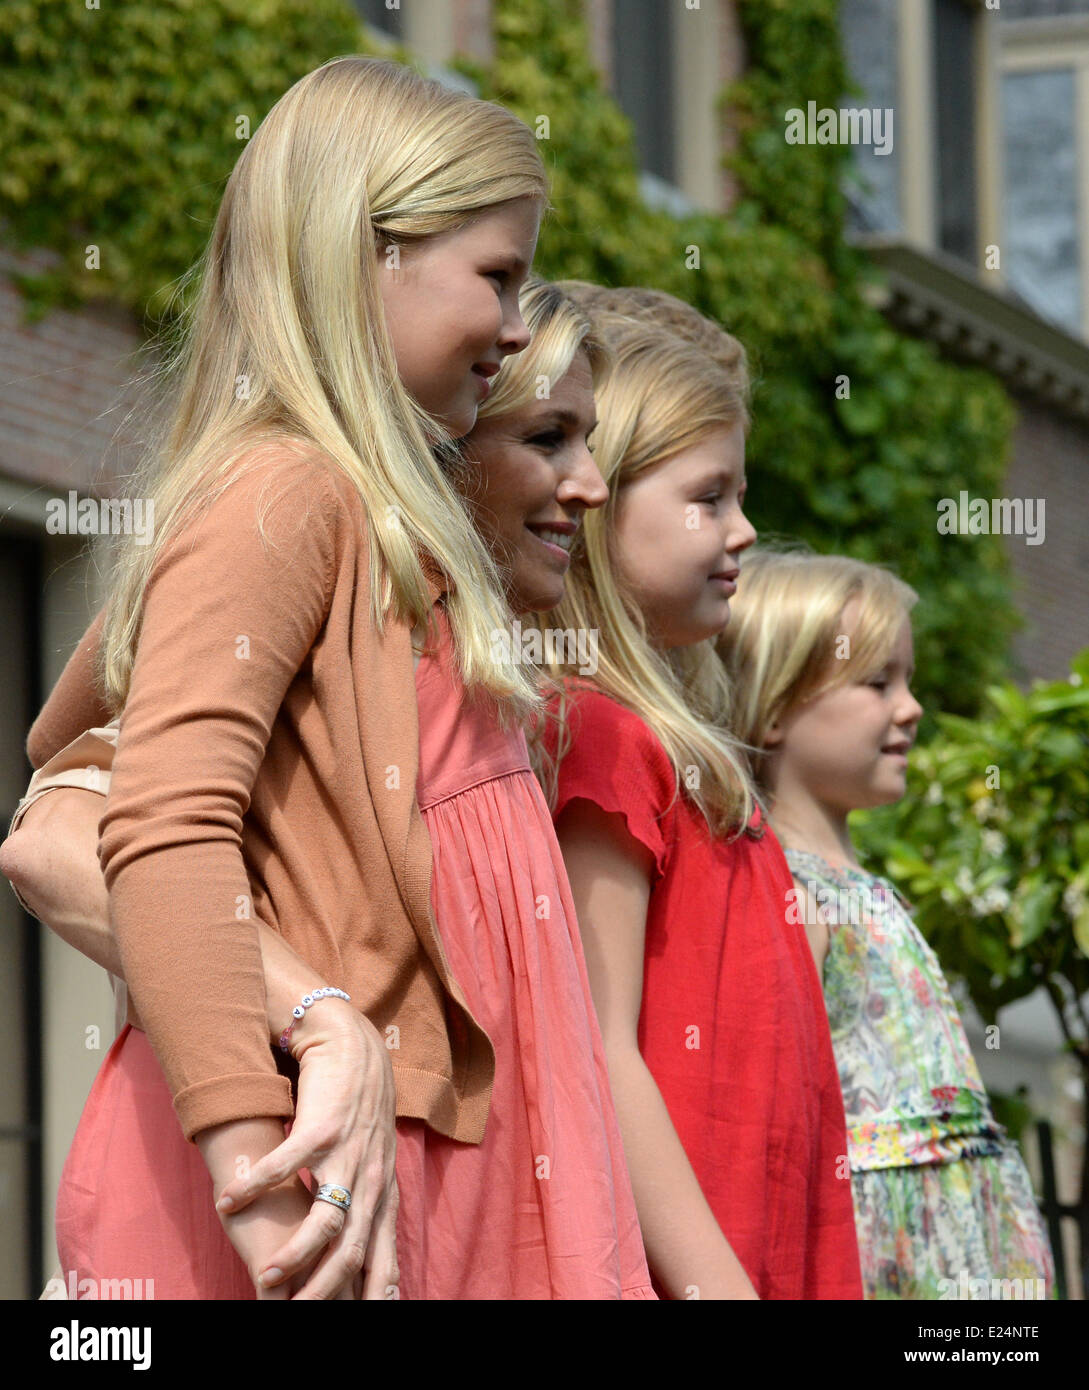 queen-maxima-of-the-netherlands-princess-ariane-of-the-netherlands-E24NTE.jpg